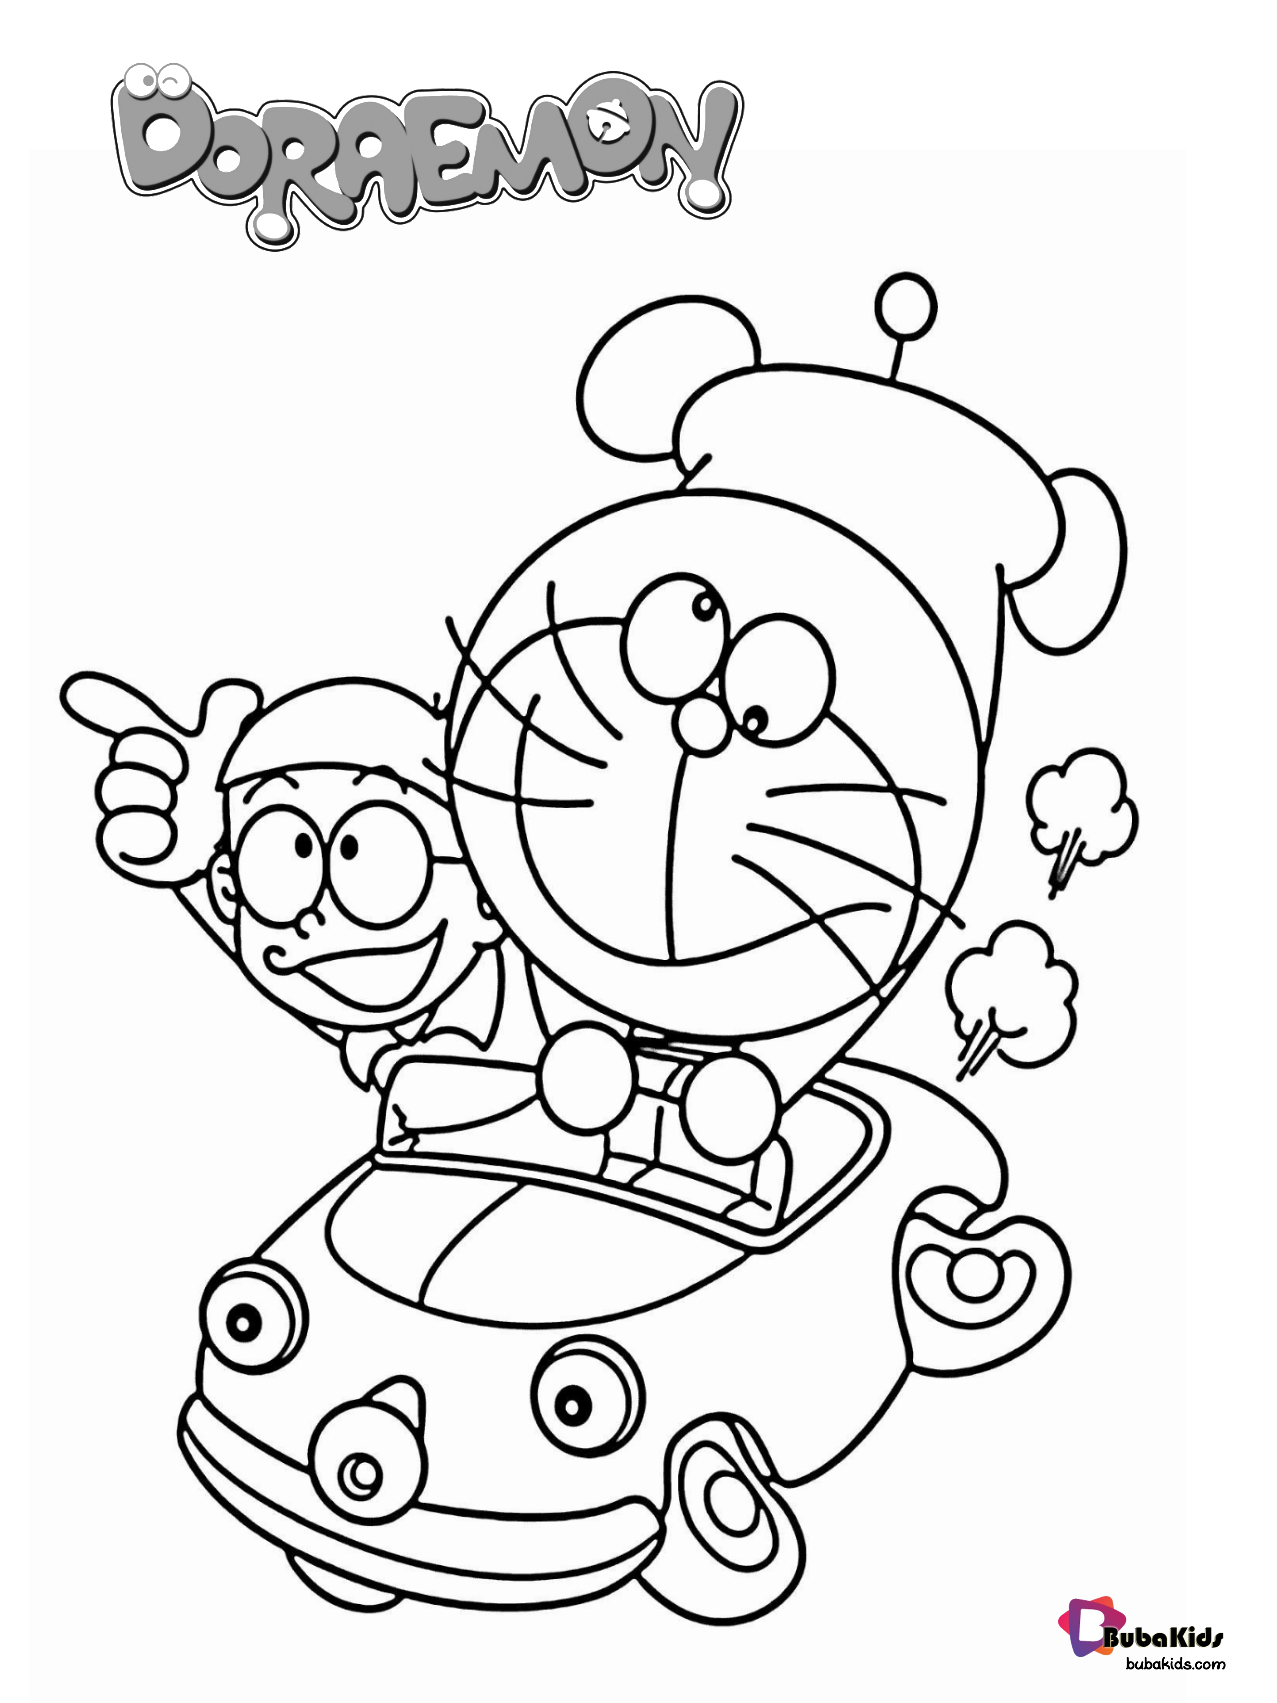 Free download and printable Doraemon and nobita coloring page.